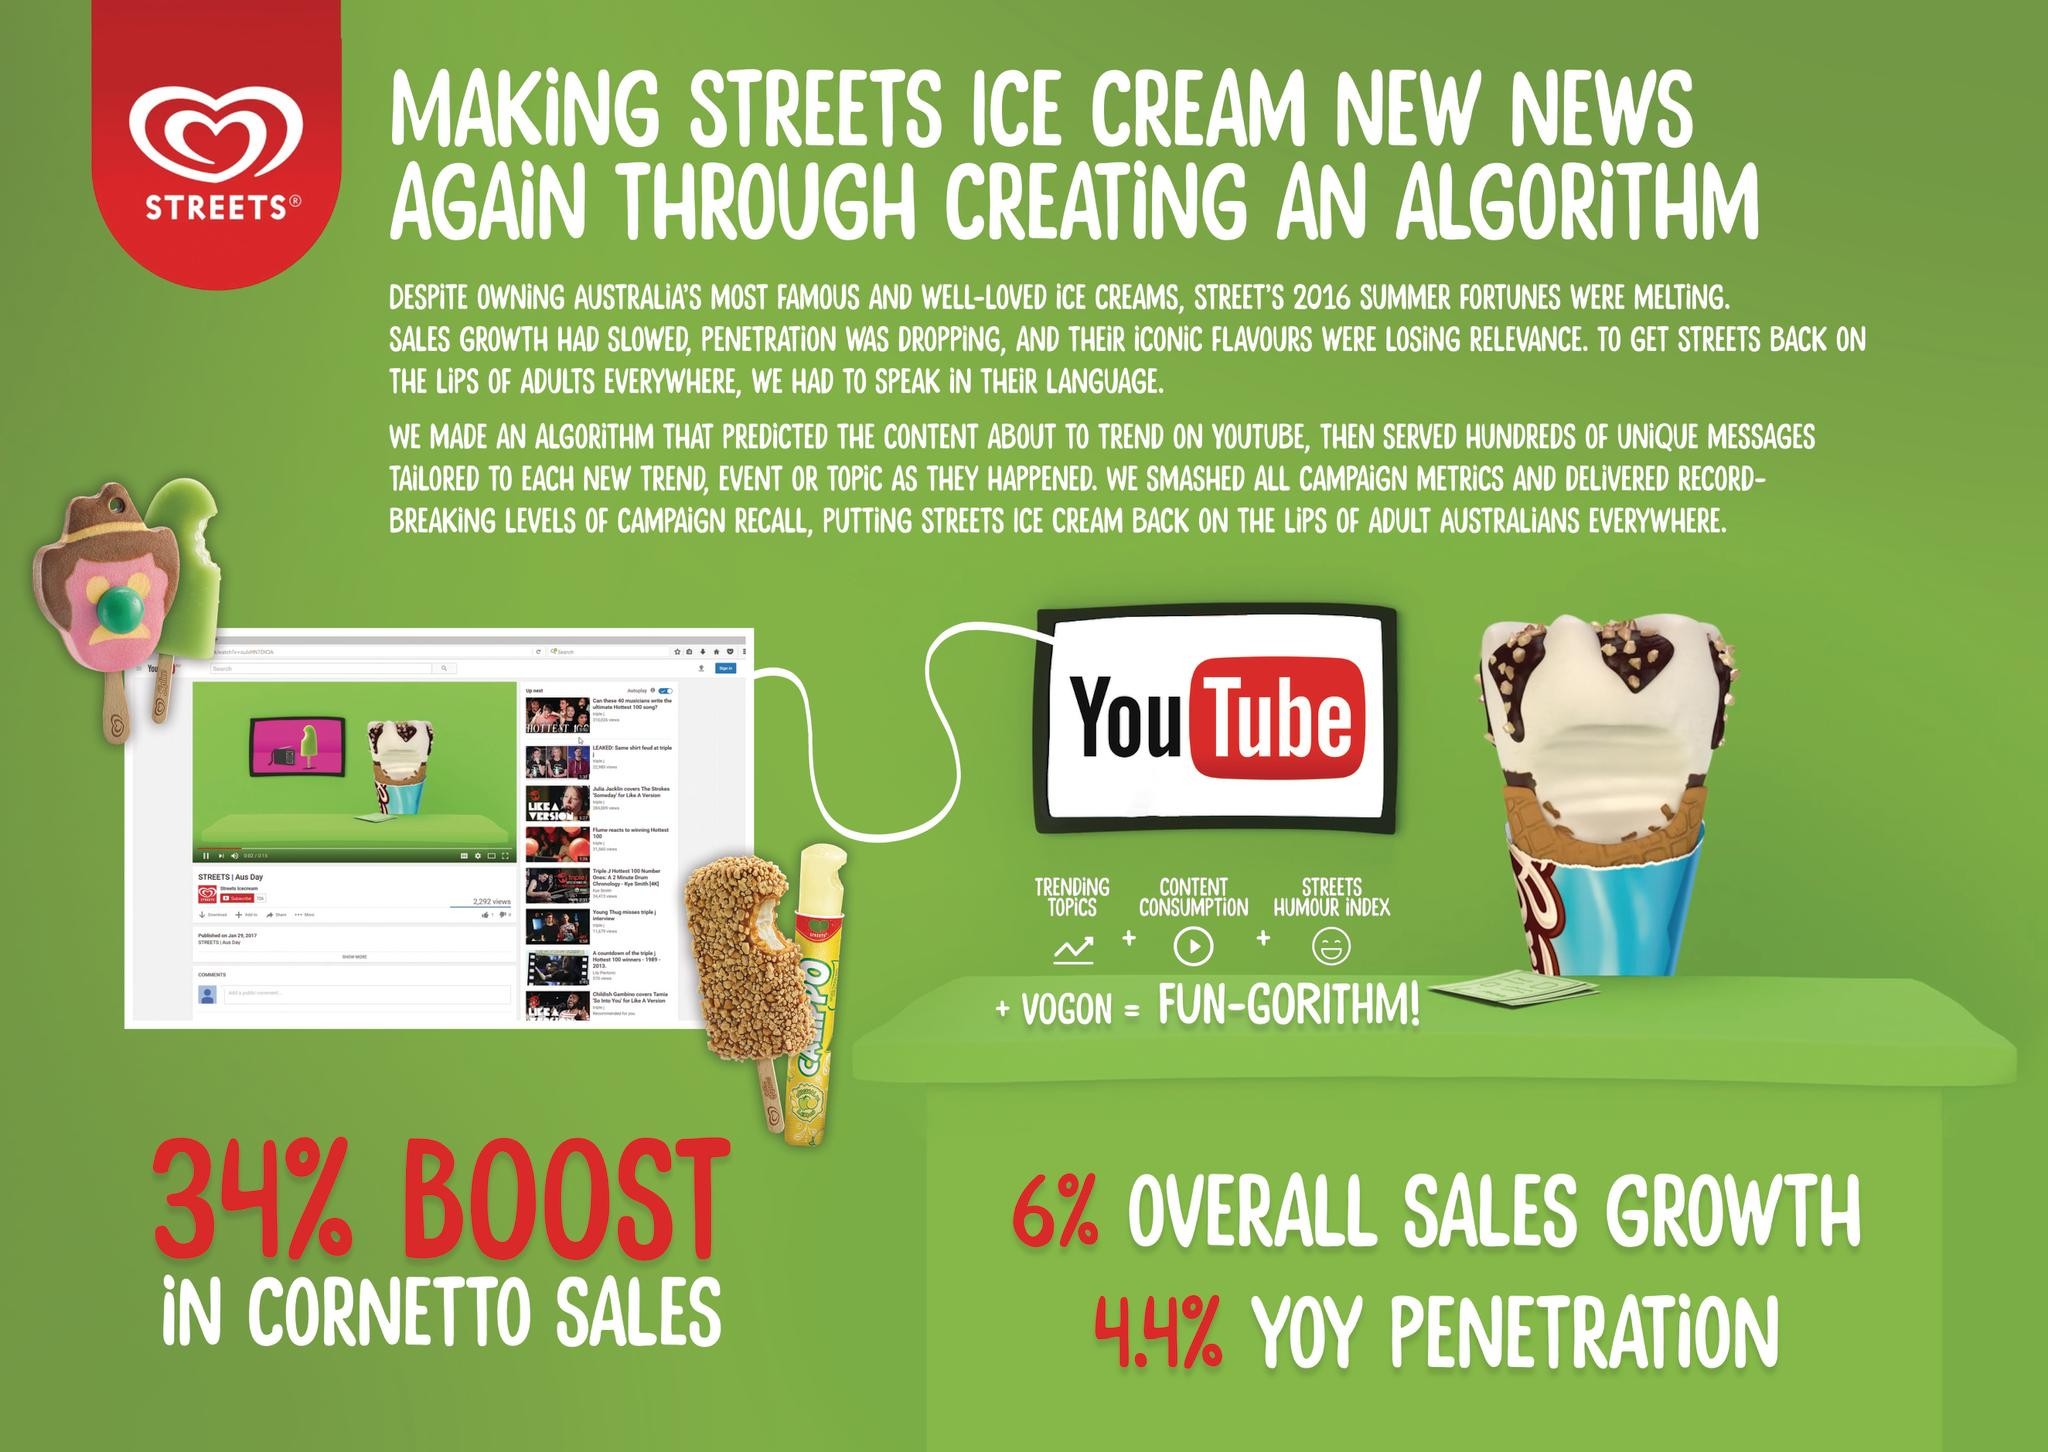 How Hyper Relevance put Streets Ice Cream back on the lips of Aussies